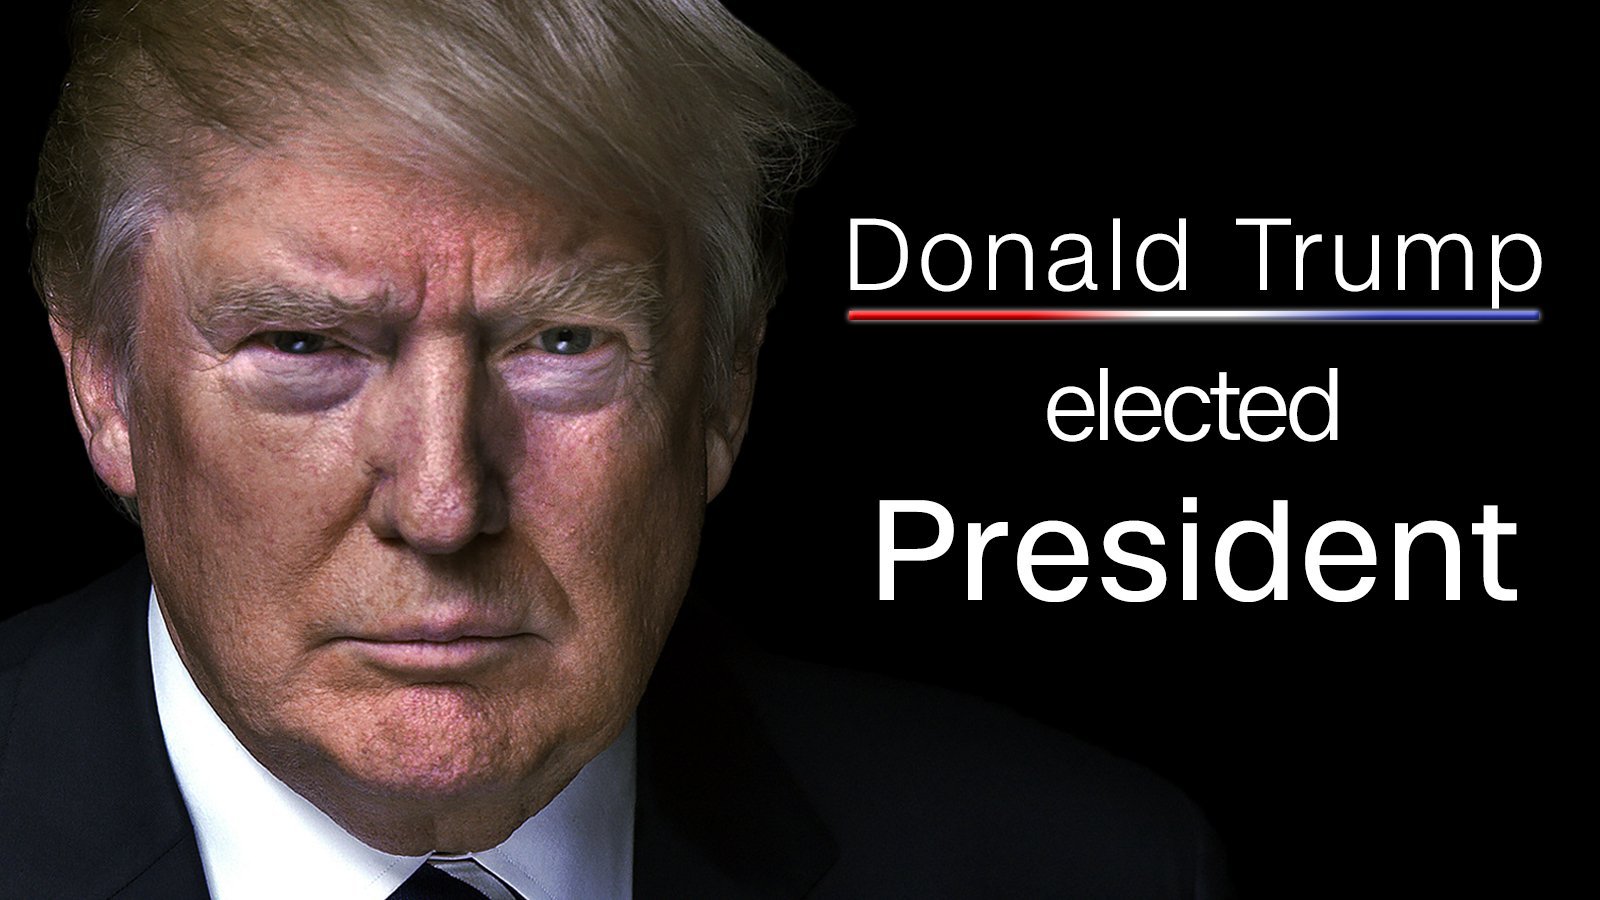 CNN projects Donald Trump will become the 45th President of the United States.